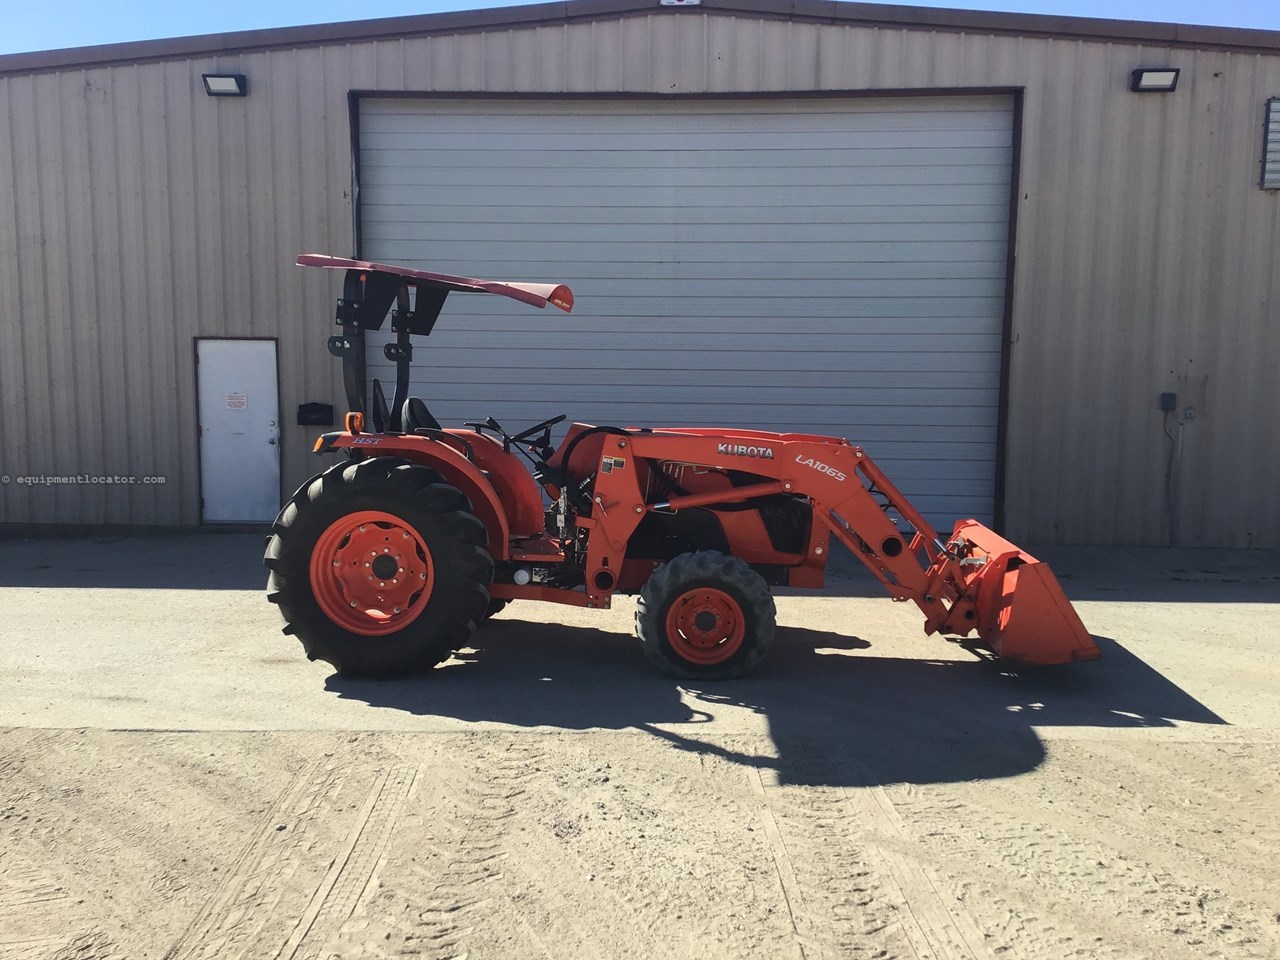 2019 Kubota Mx5800 Compact Utility Tractor For Sale In Terrell Texas